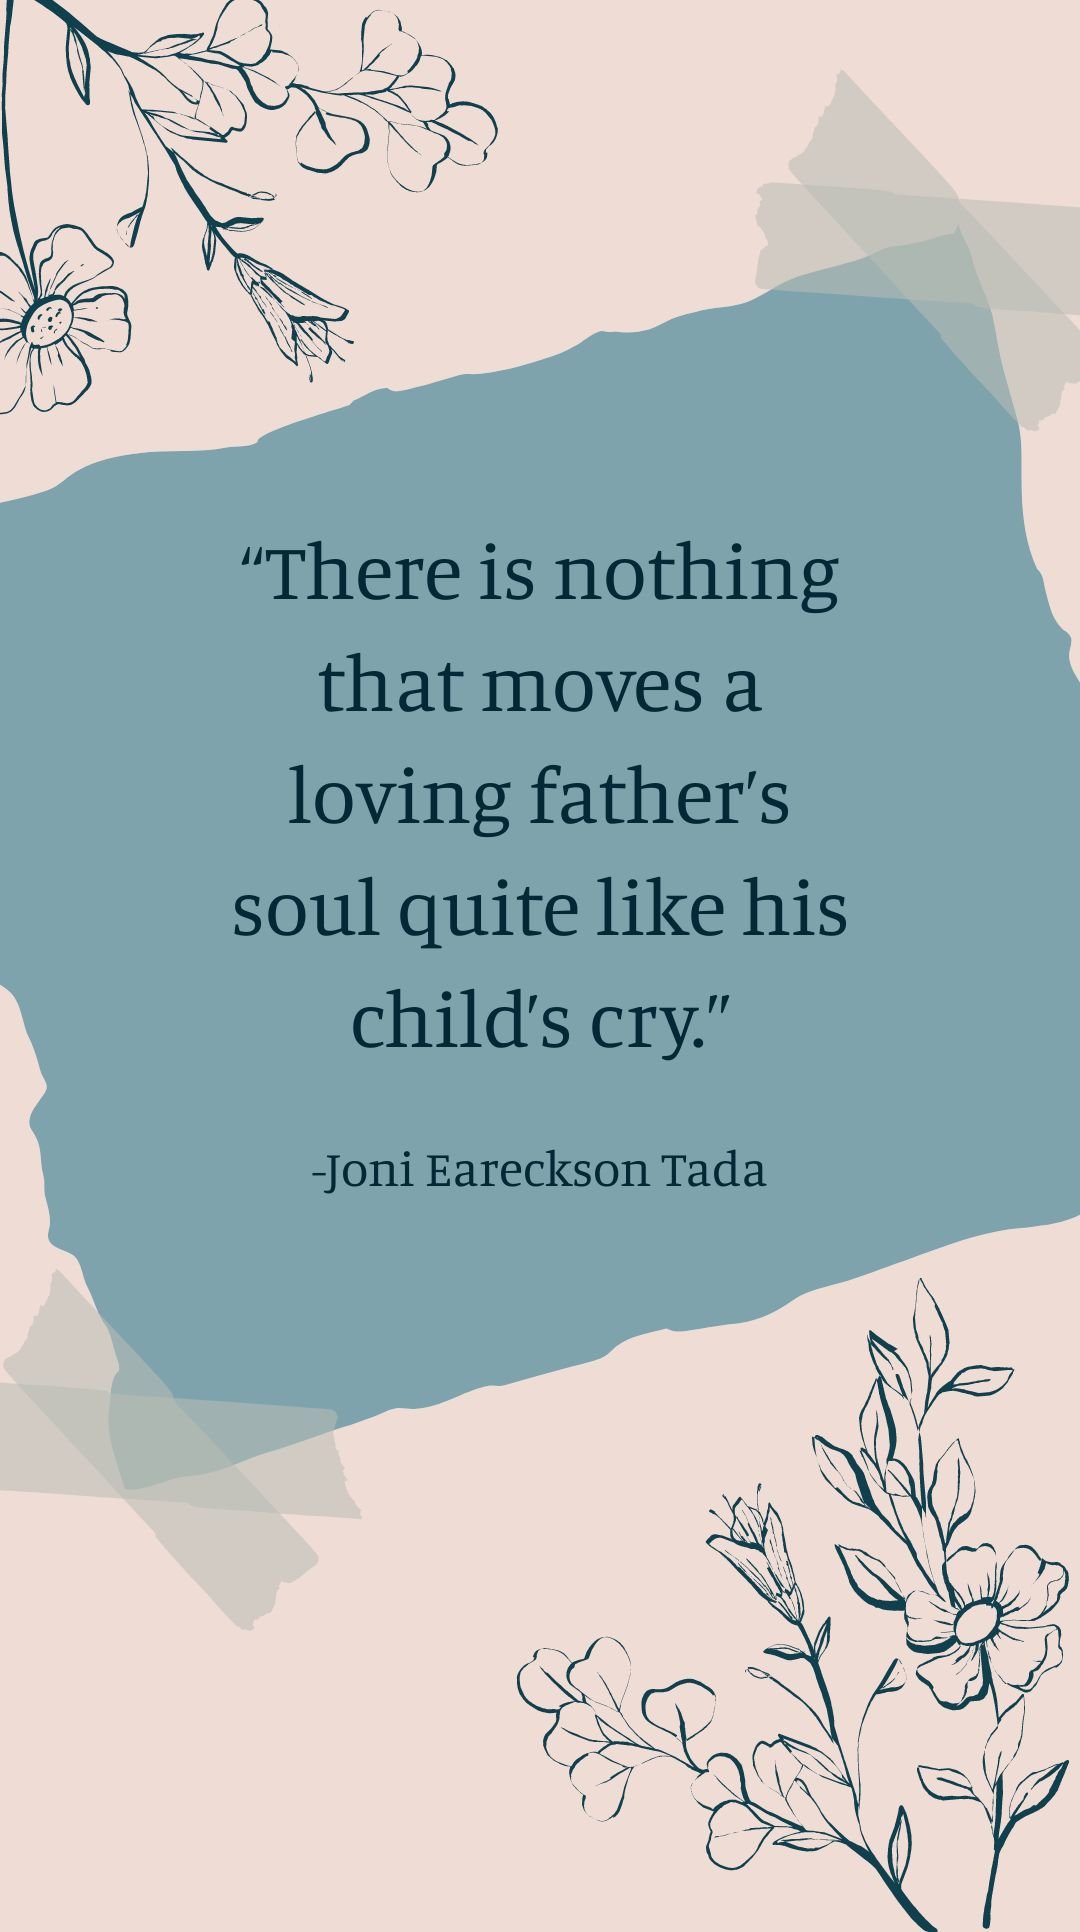 Free Joni Eareckson Tada - There is nothing that moves a loving father’s soul quite like his child’s cry.